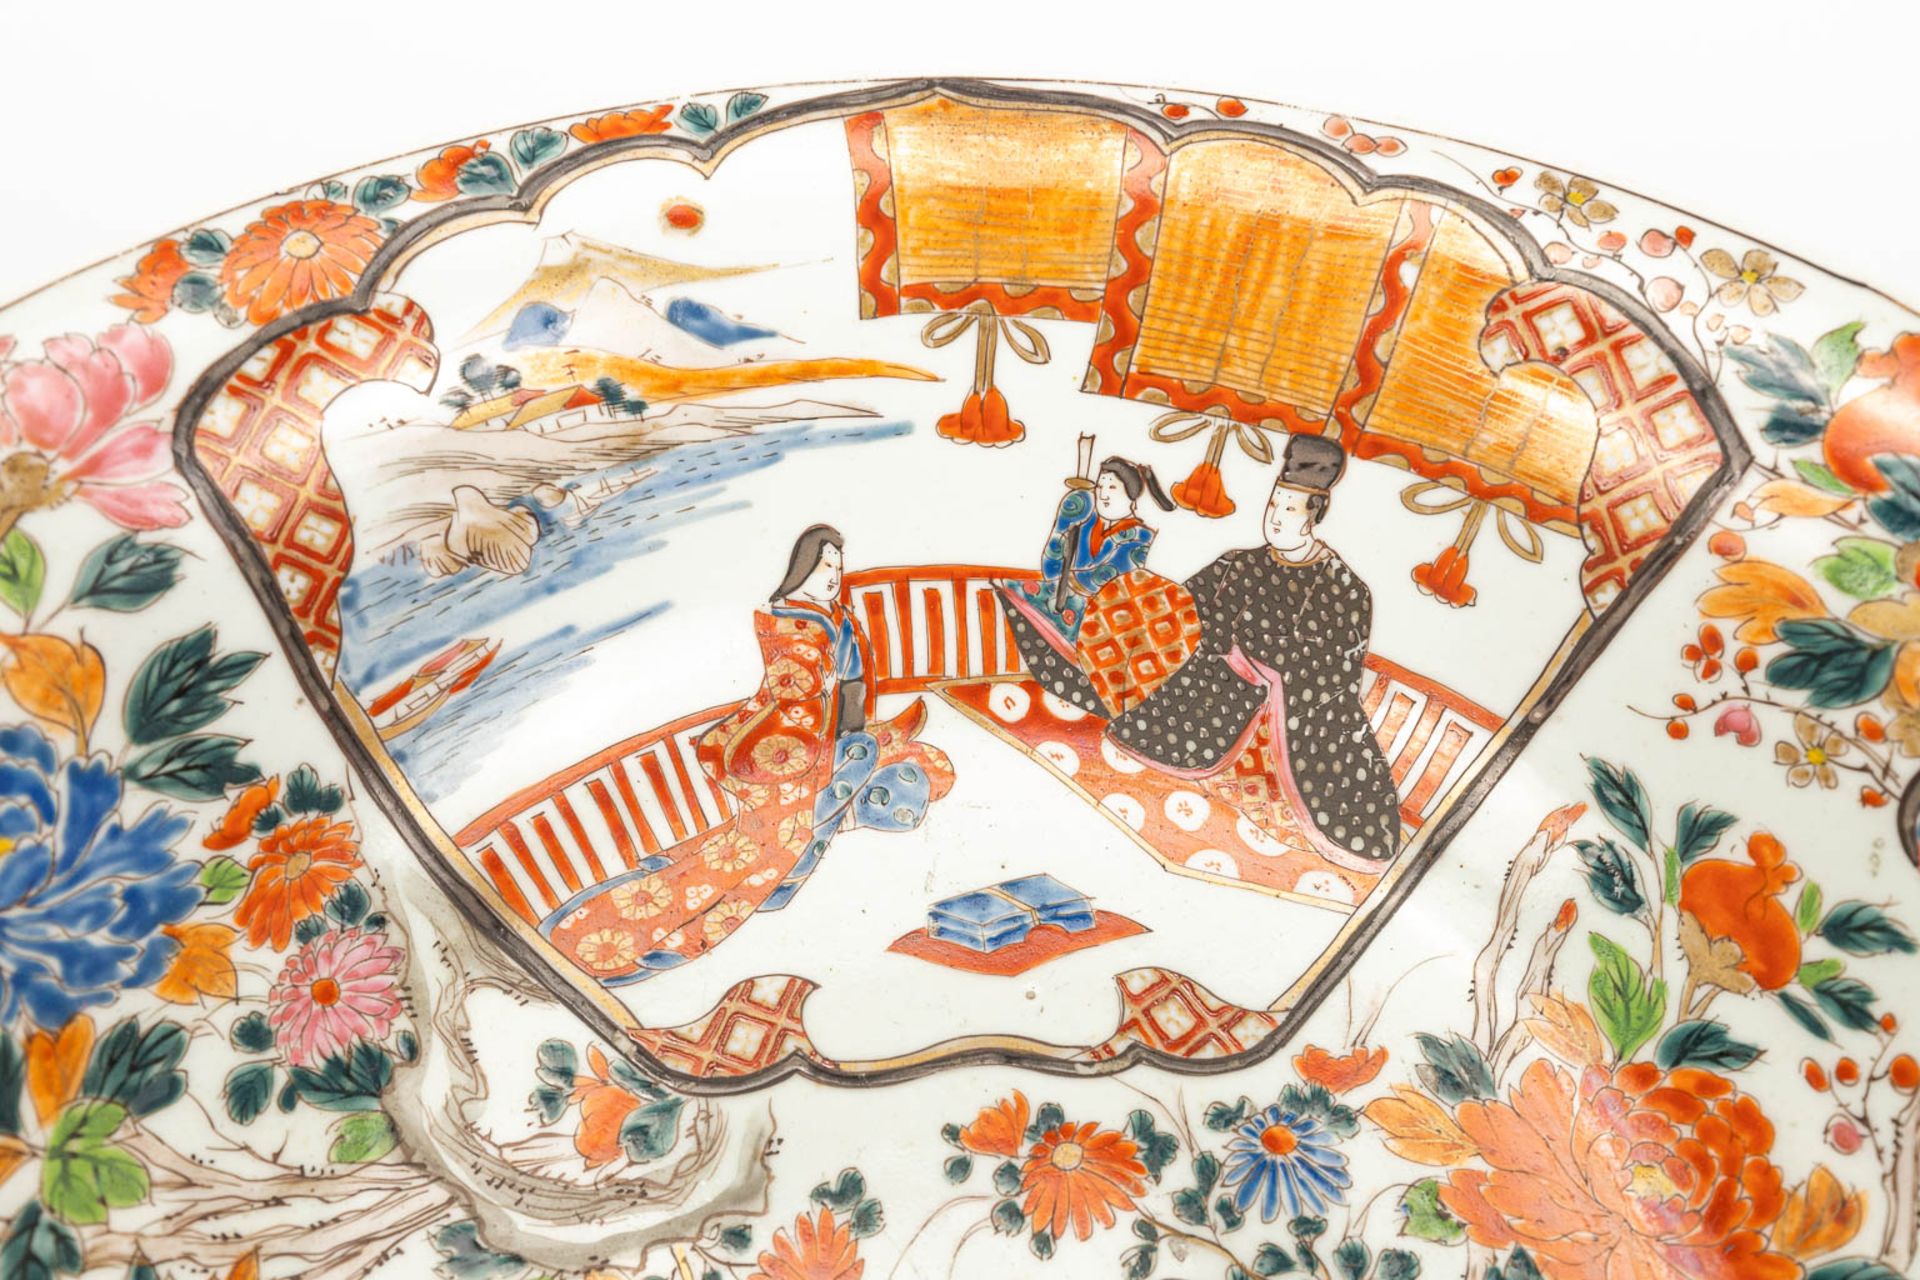 A bowl made of Japanese porcelain and decorated Kutani. - Image 12 of 14